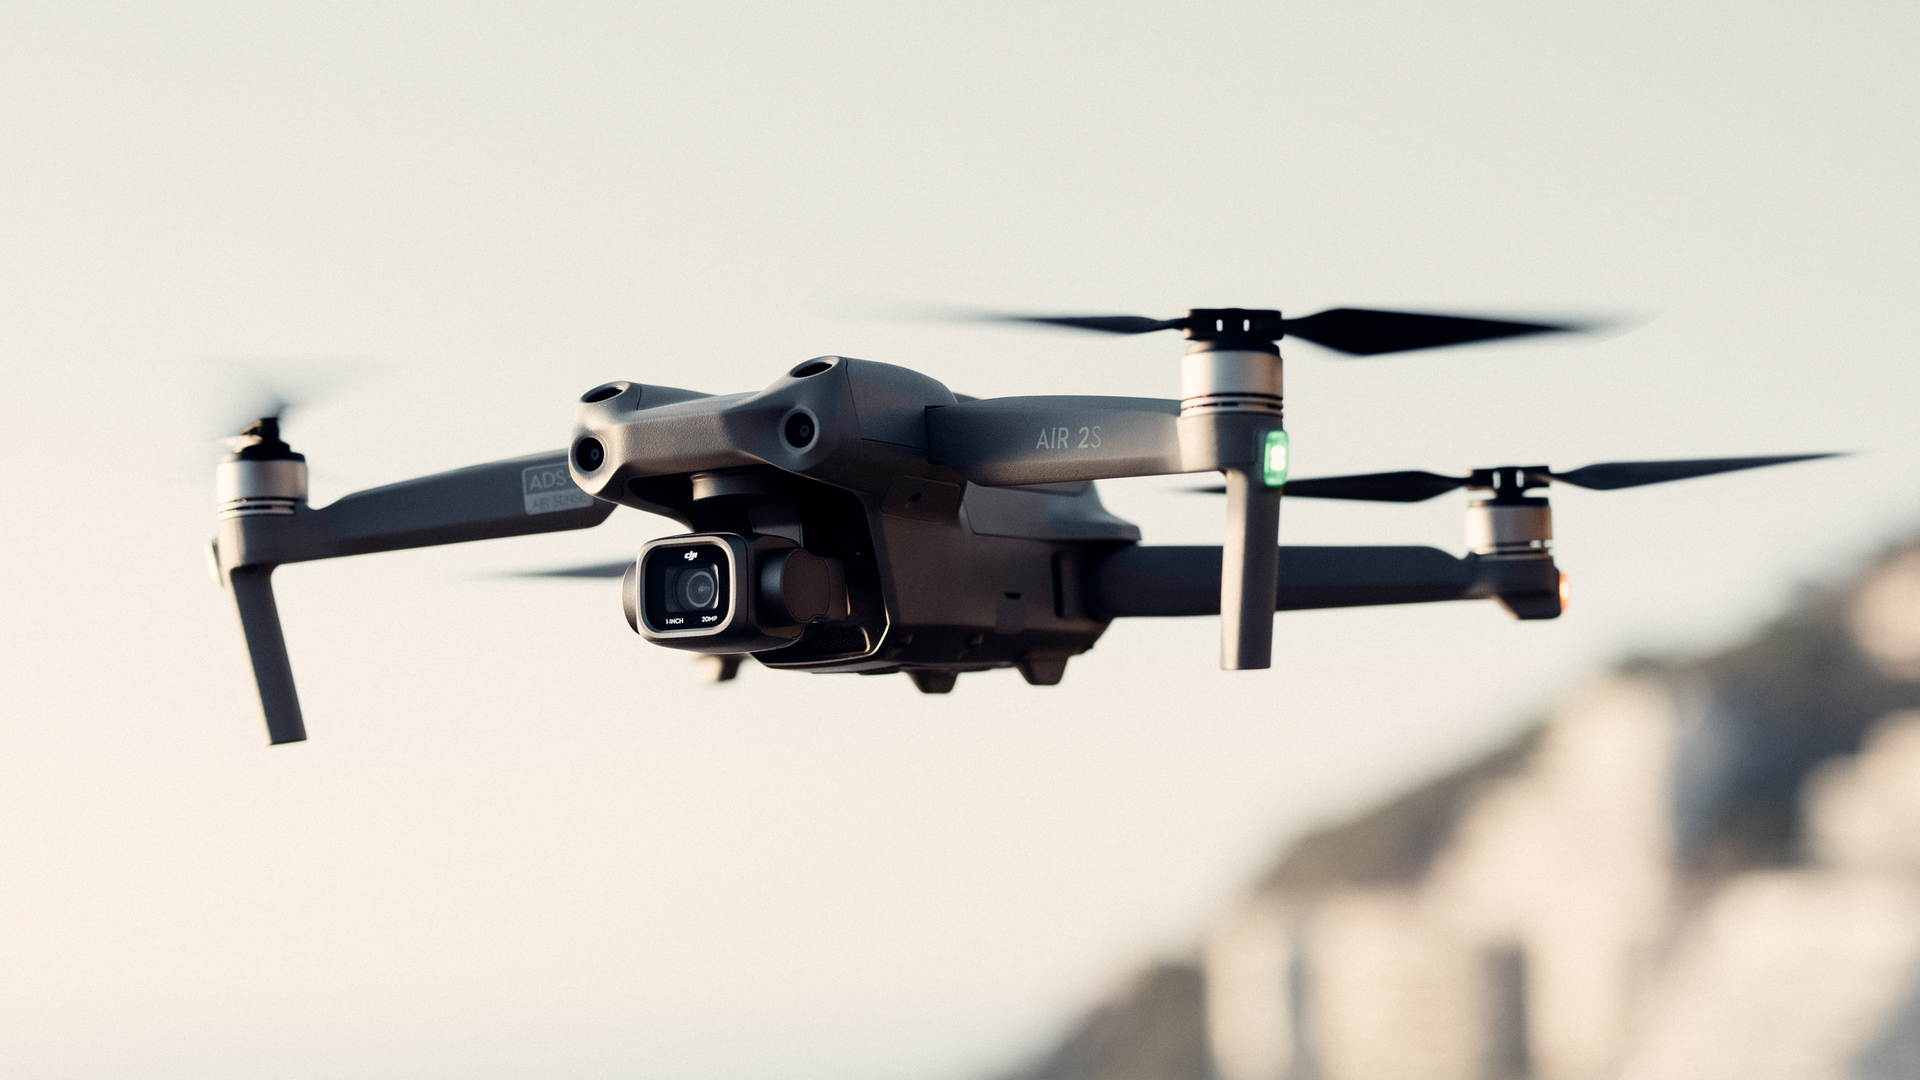 The almost perfect DJI Air 2S is now available in the UAE